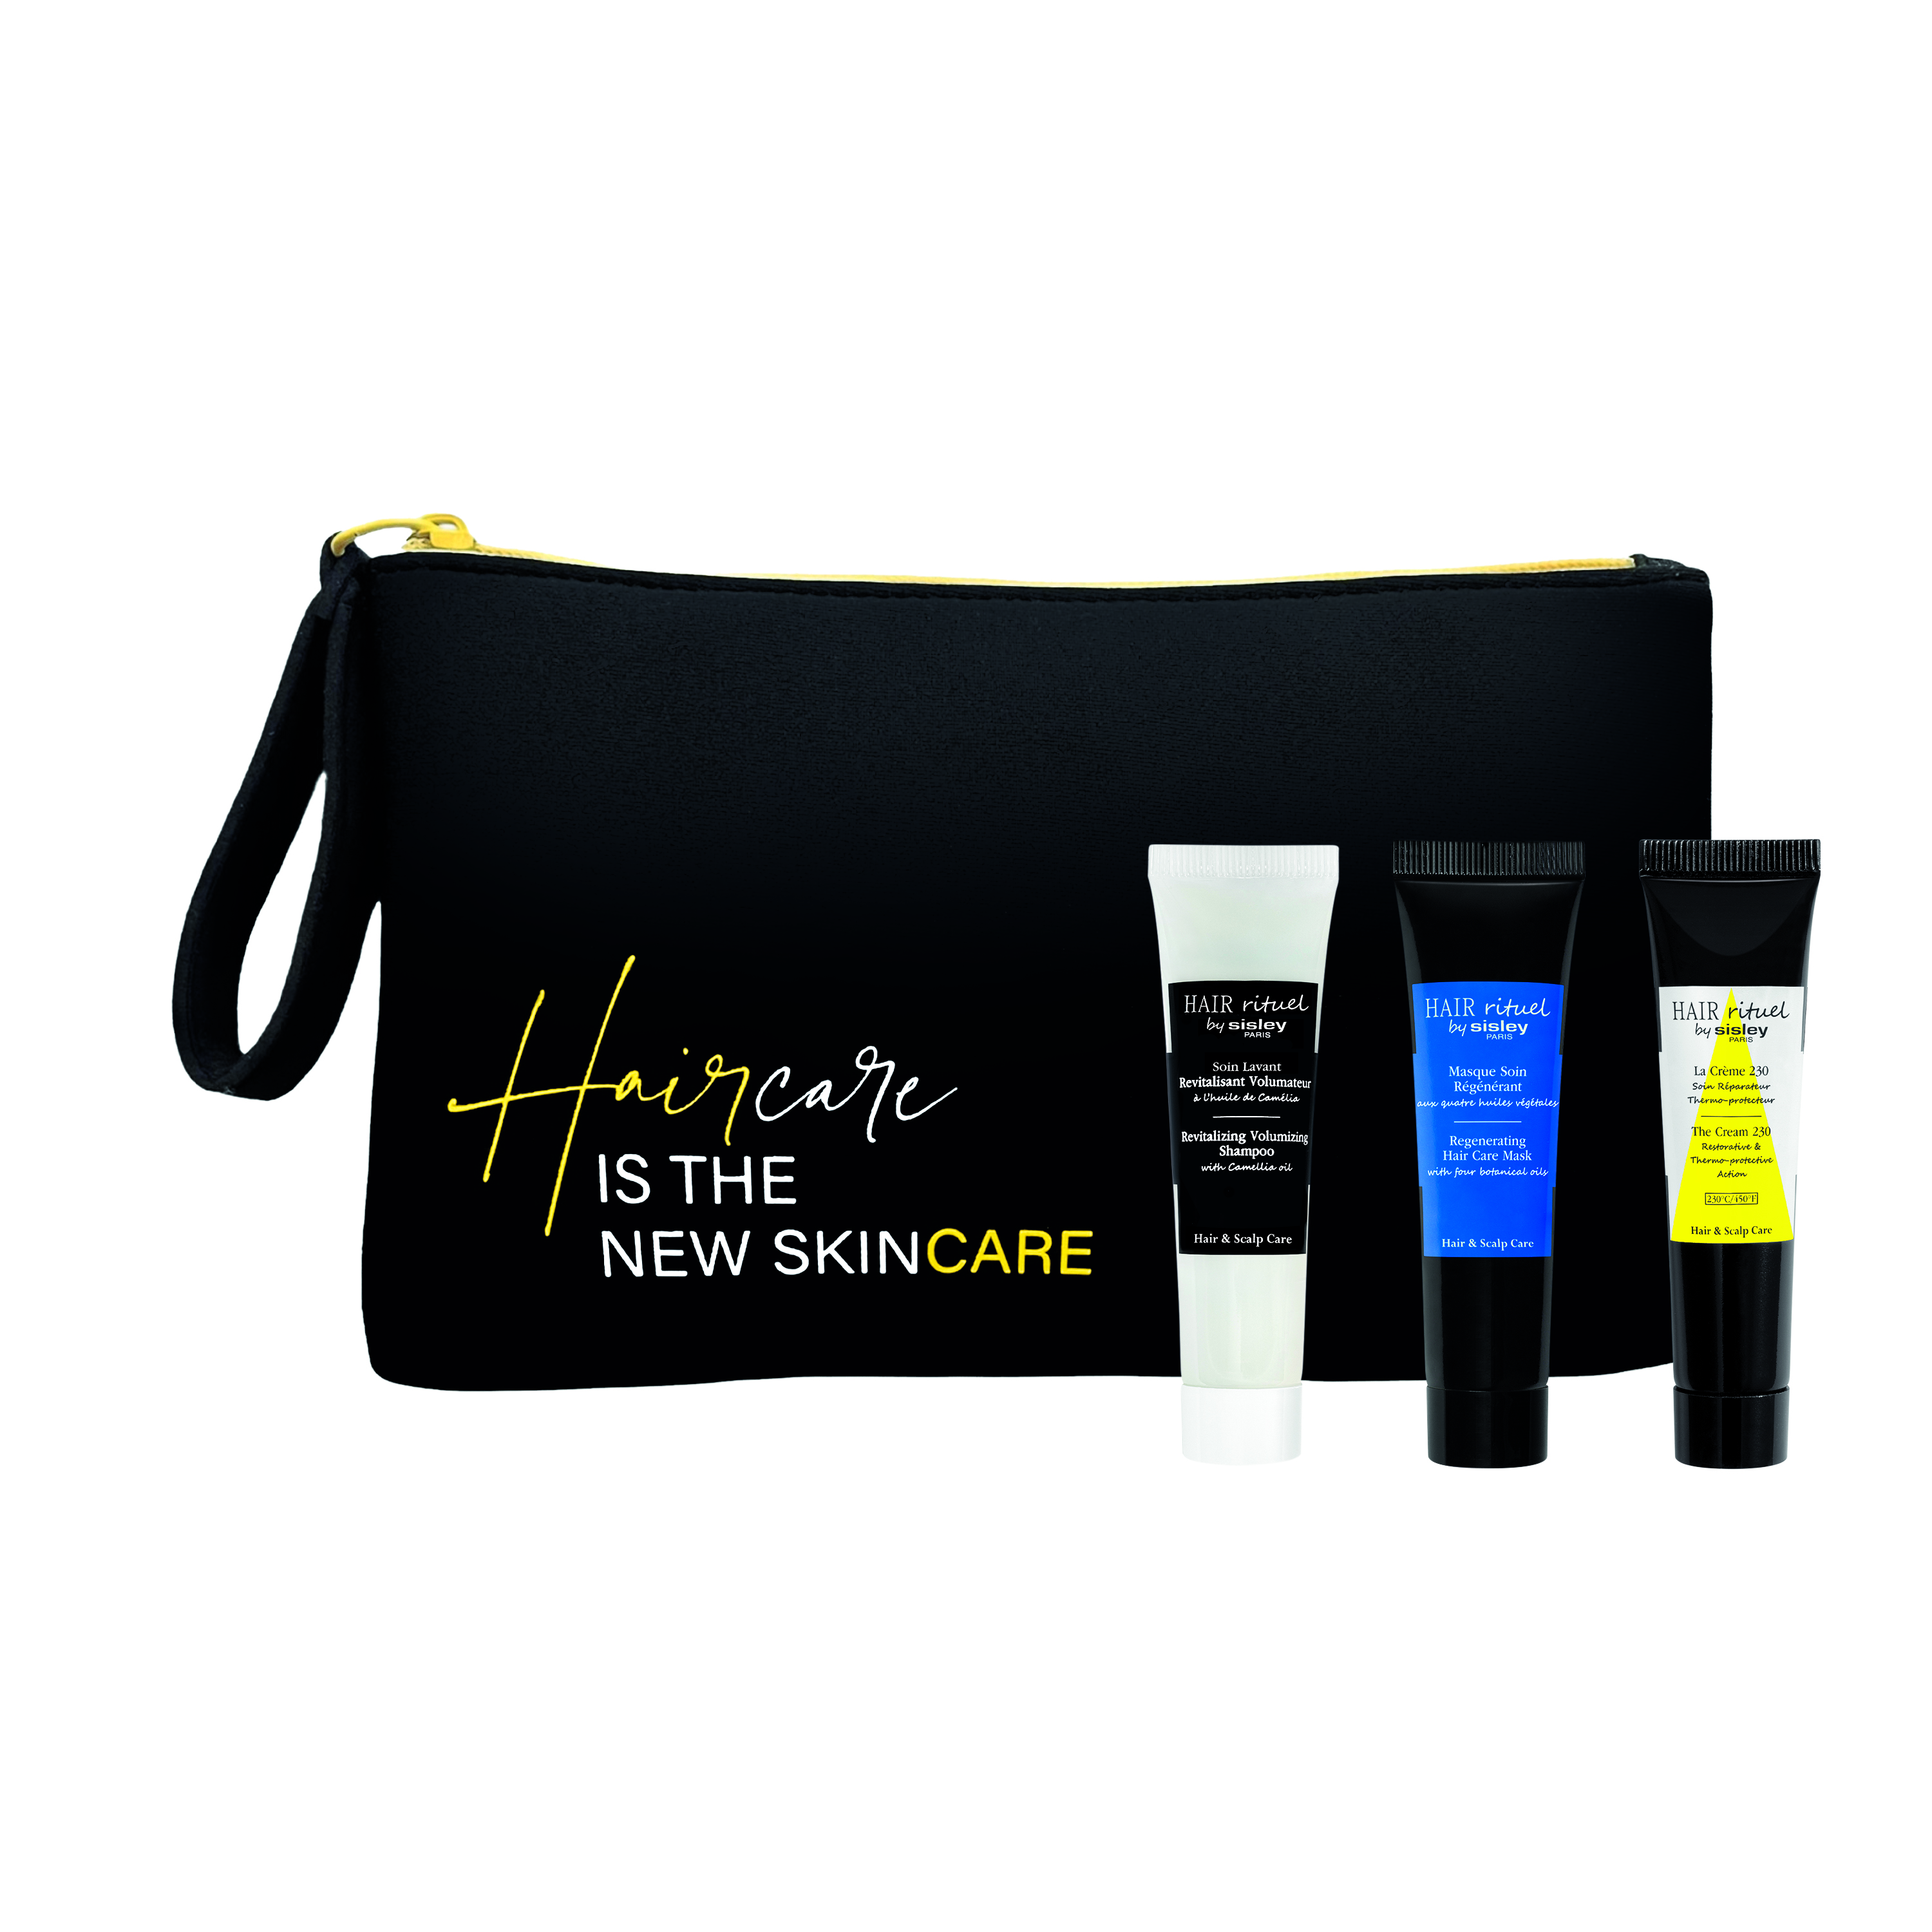 Receive a Free Hair Rituel Gift Set When You Purchase Two Hair Rituel Products.